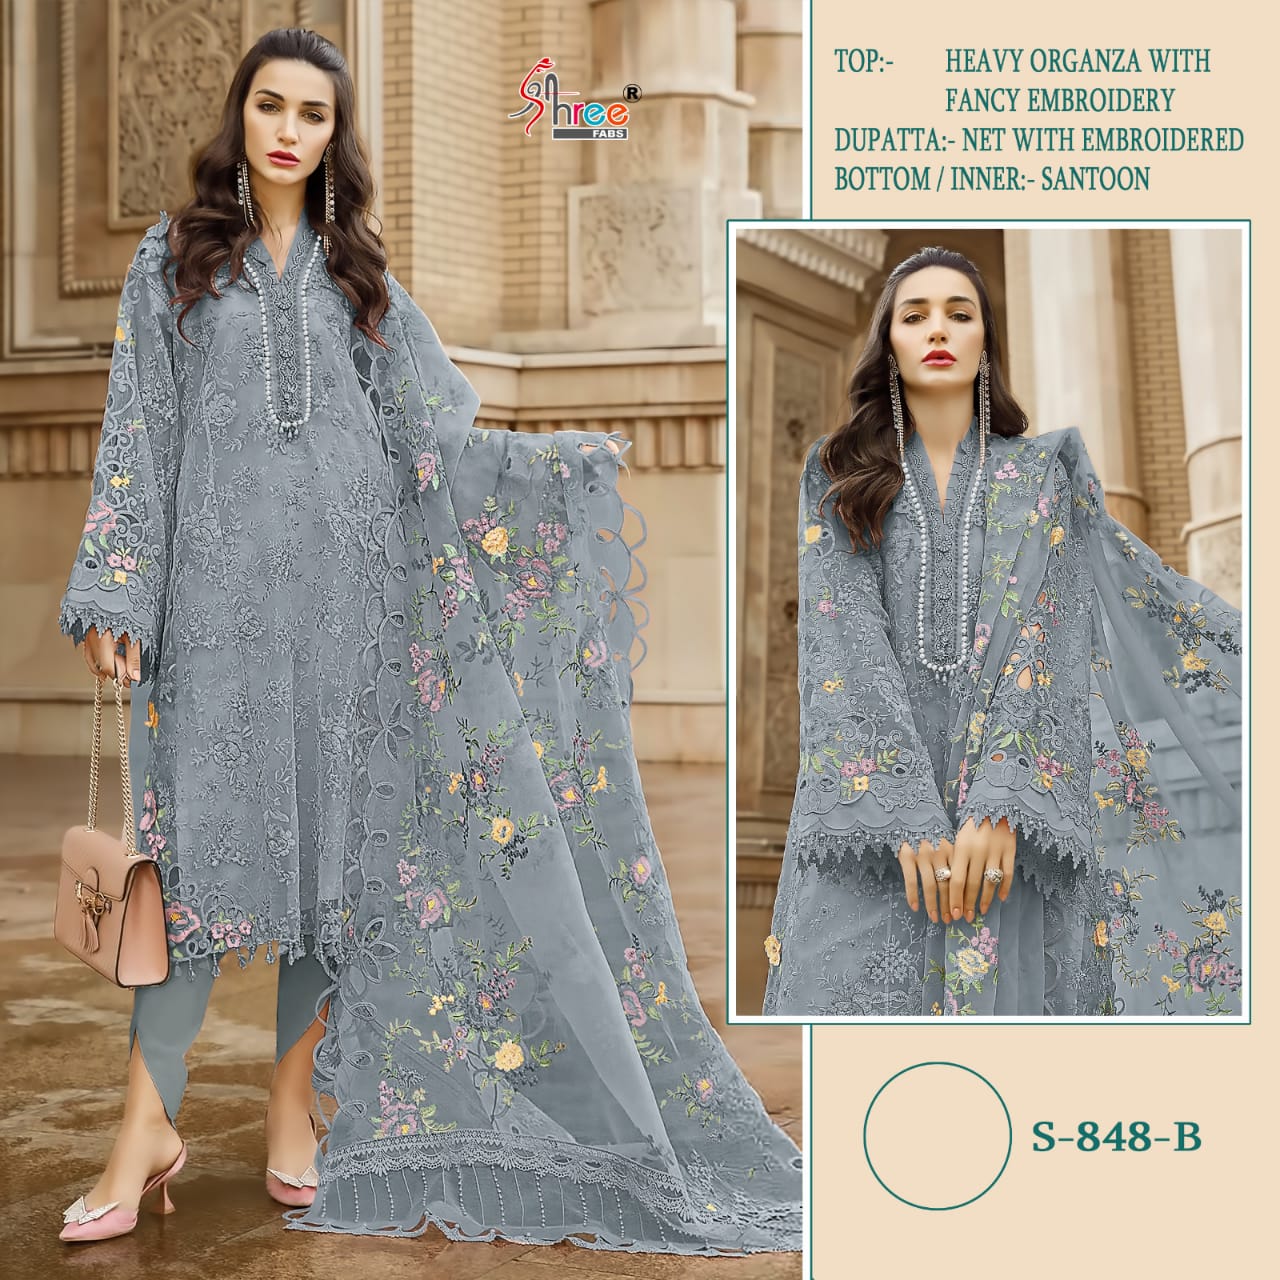 SHREE FABS S 848 B PAKISTANI SUITS IN INDIA